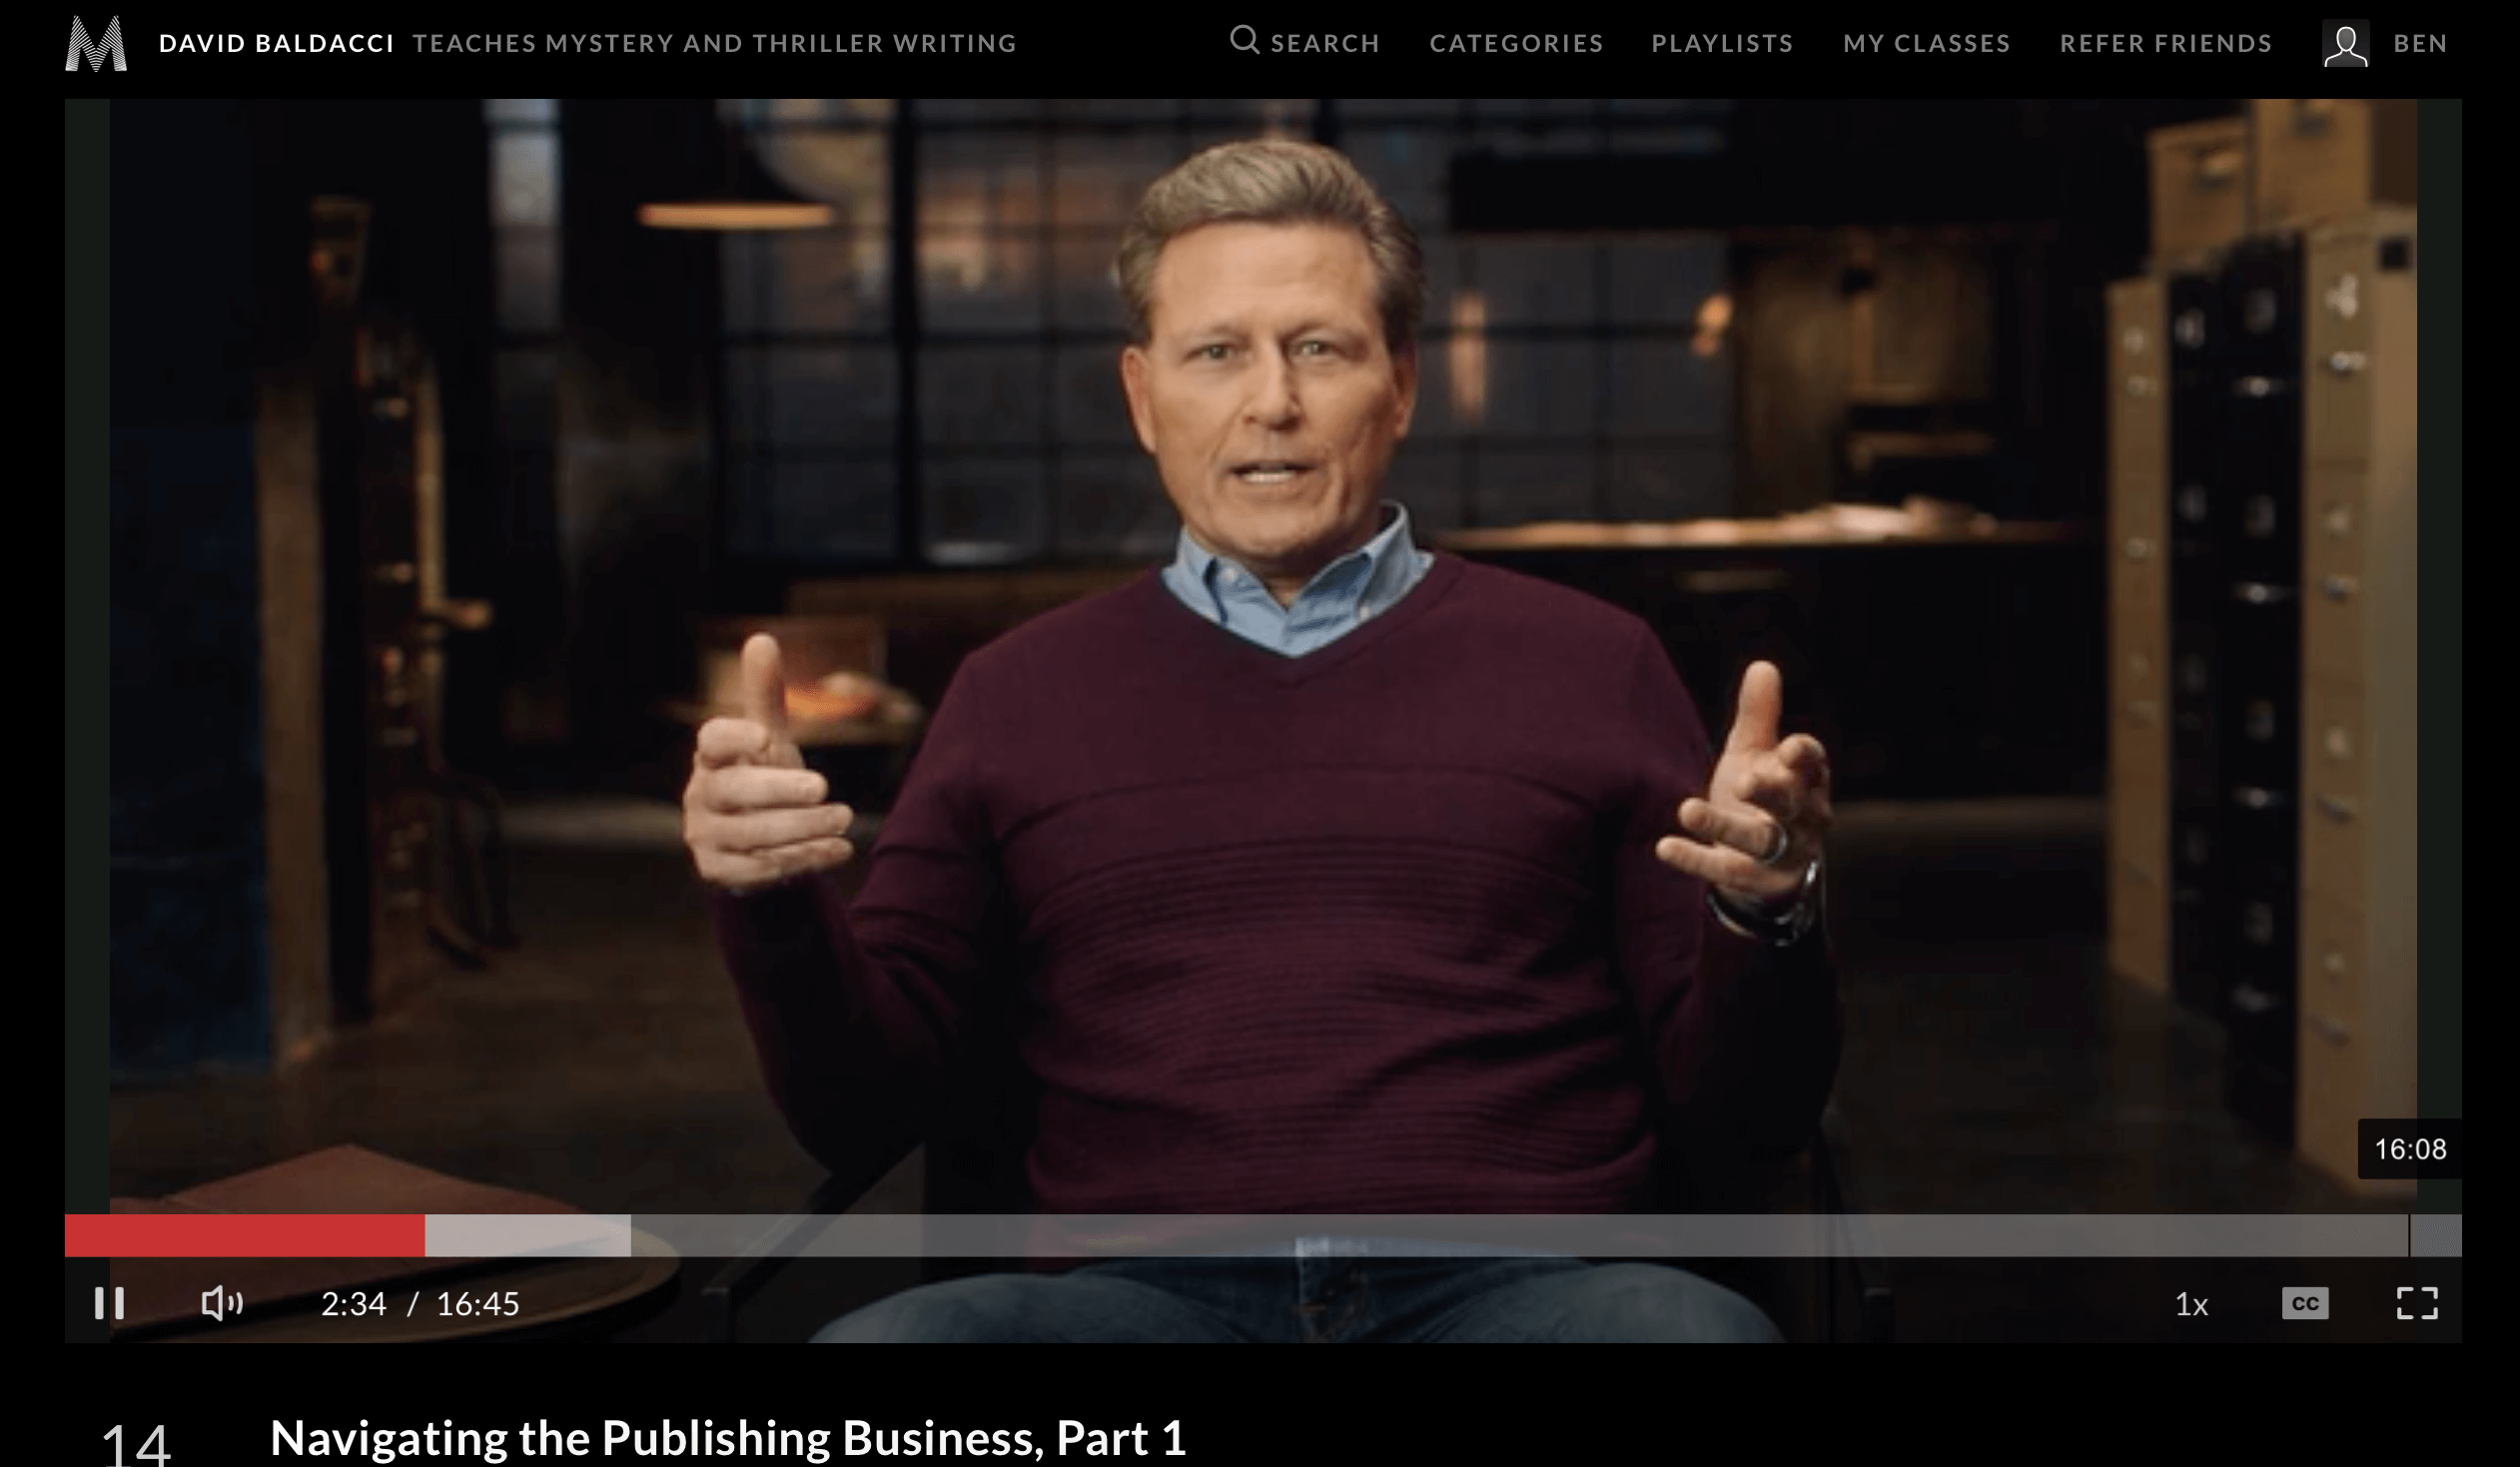 david baldacci teaches thriller and mytery writing masterclass review